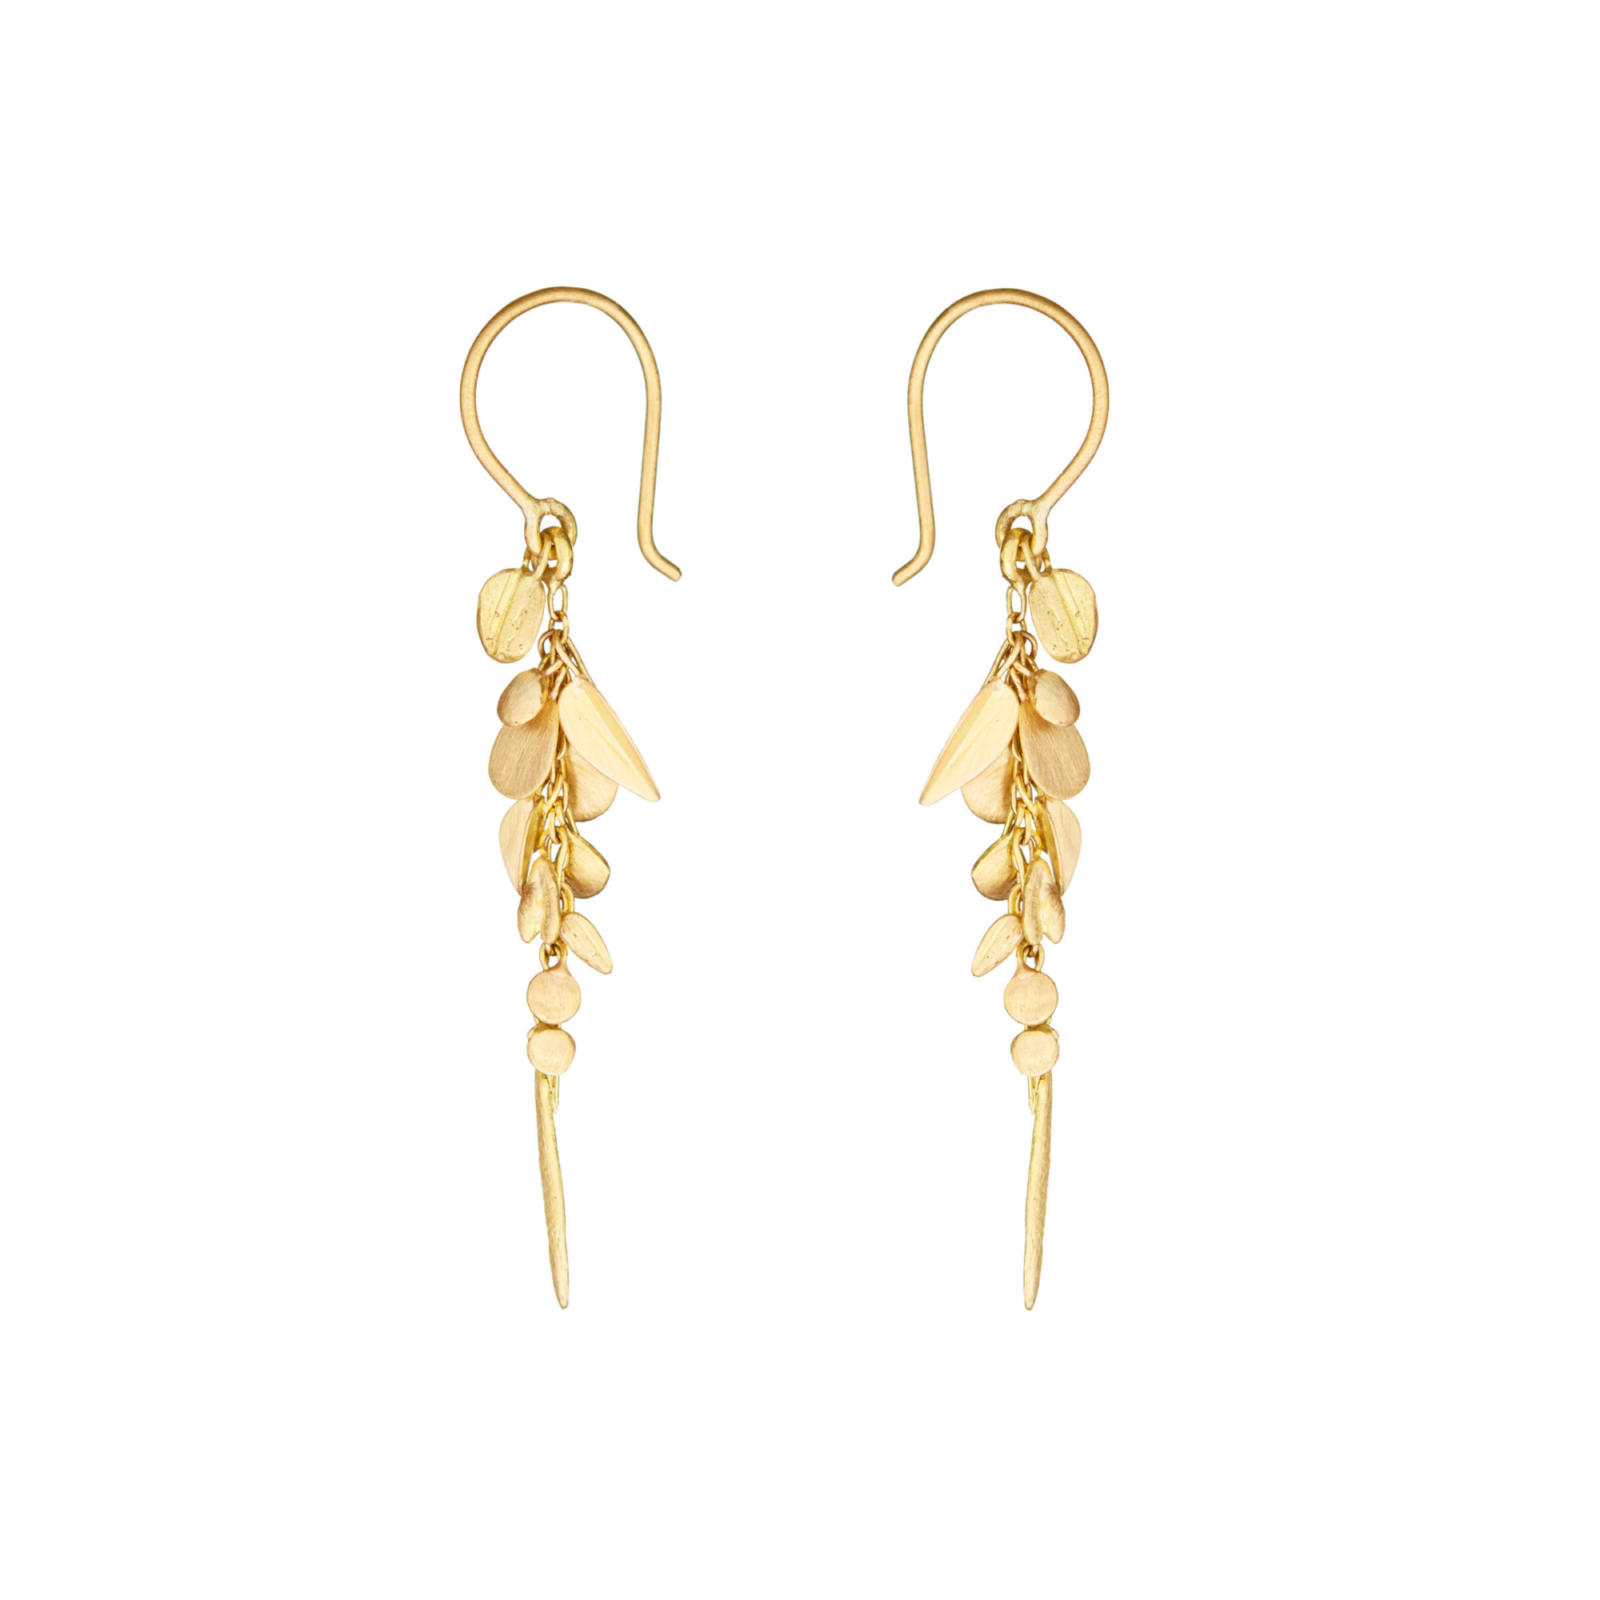 Sia Taylor ME3 Y Yellow Gold Earrings S